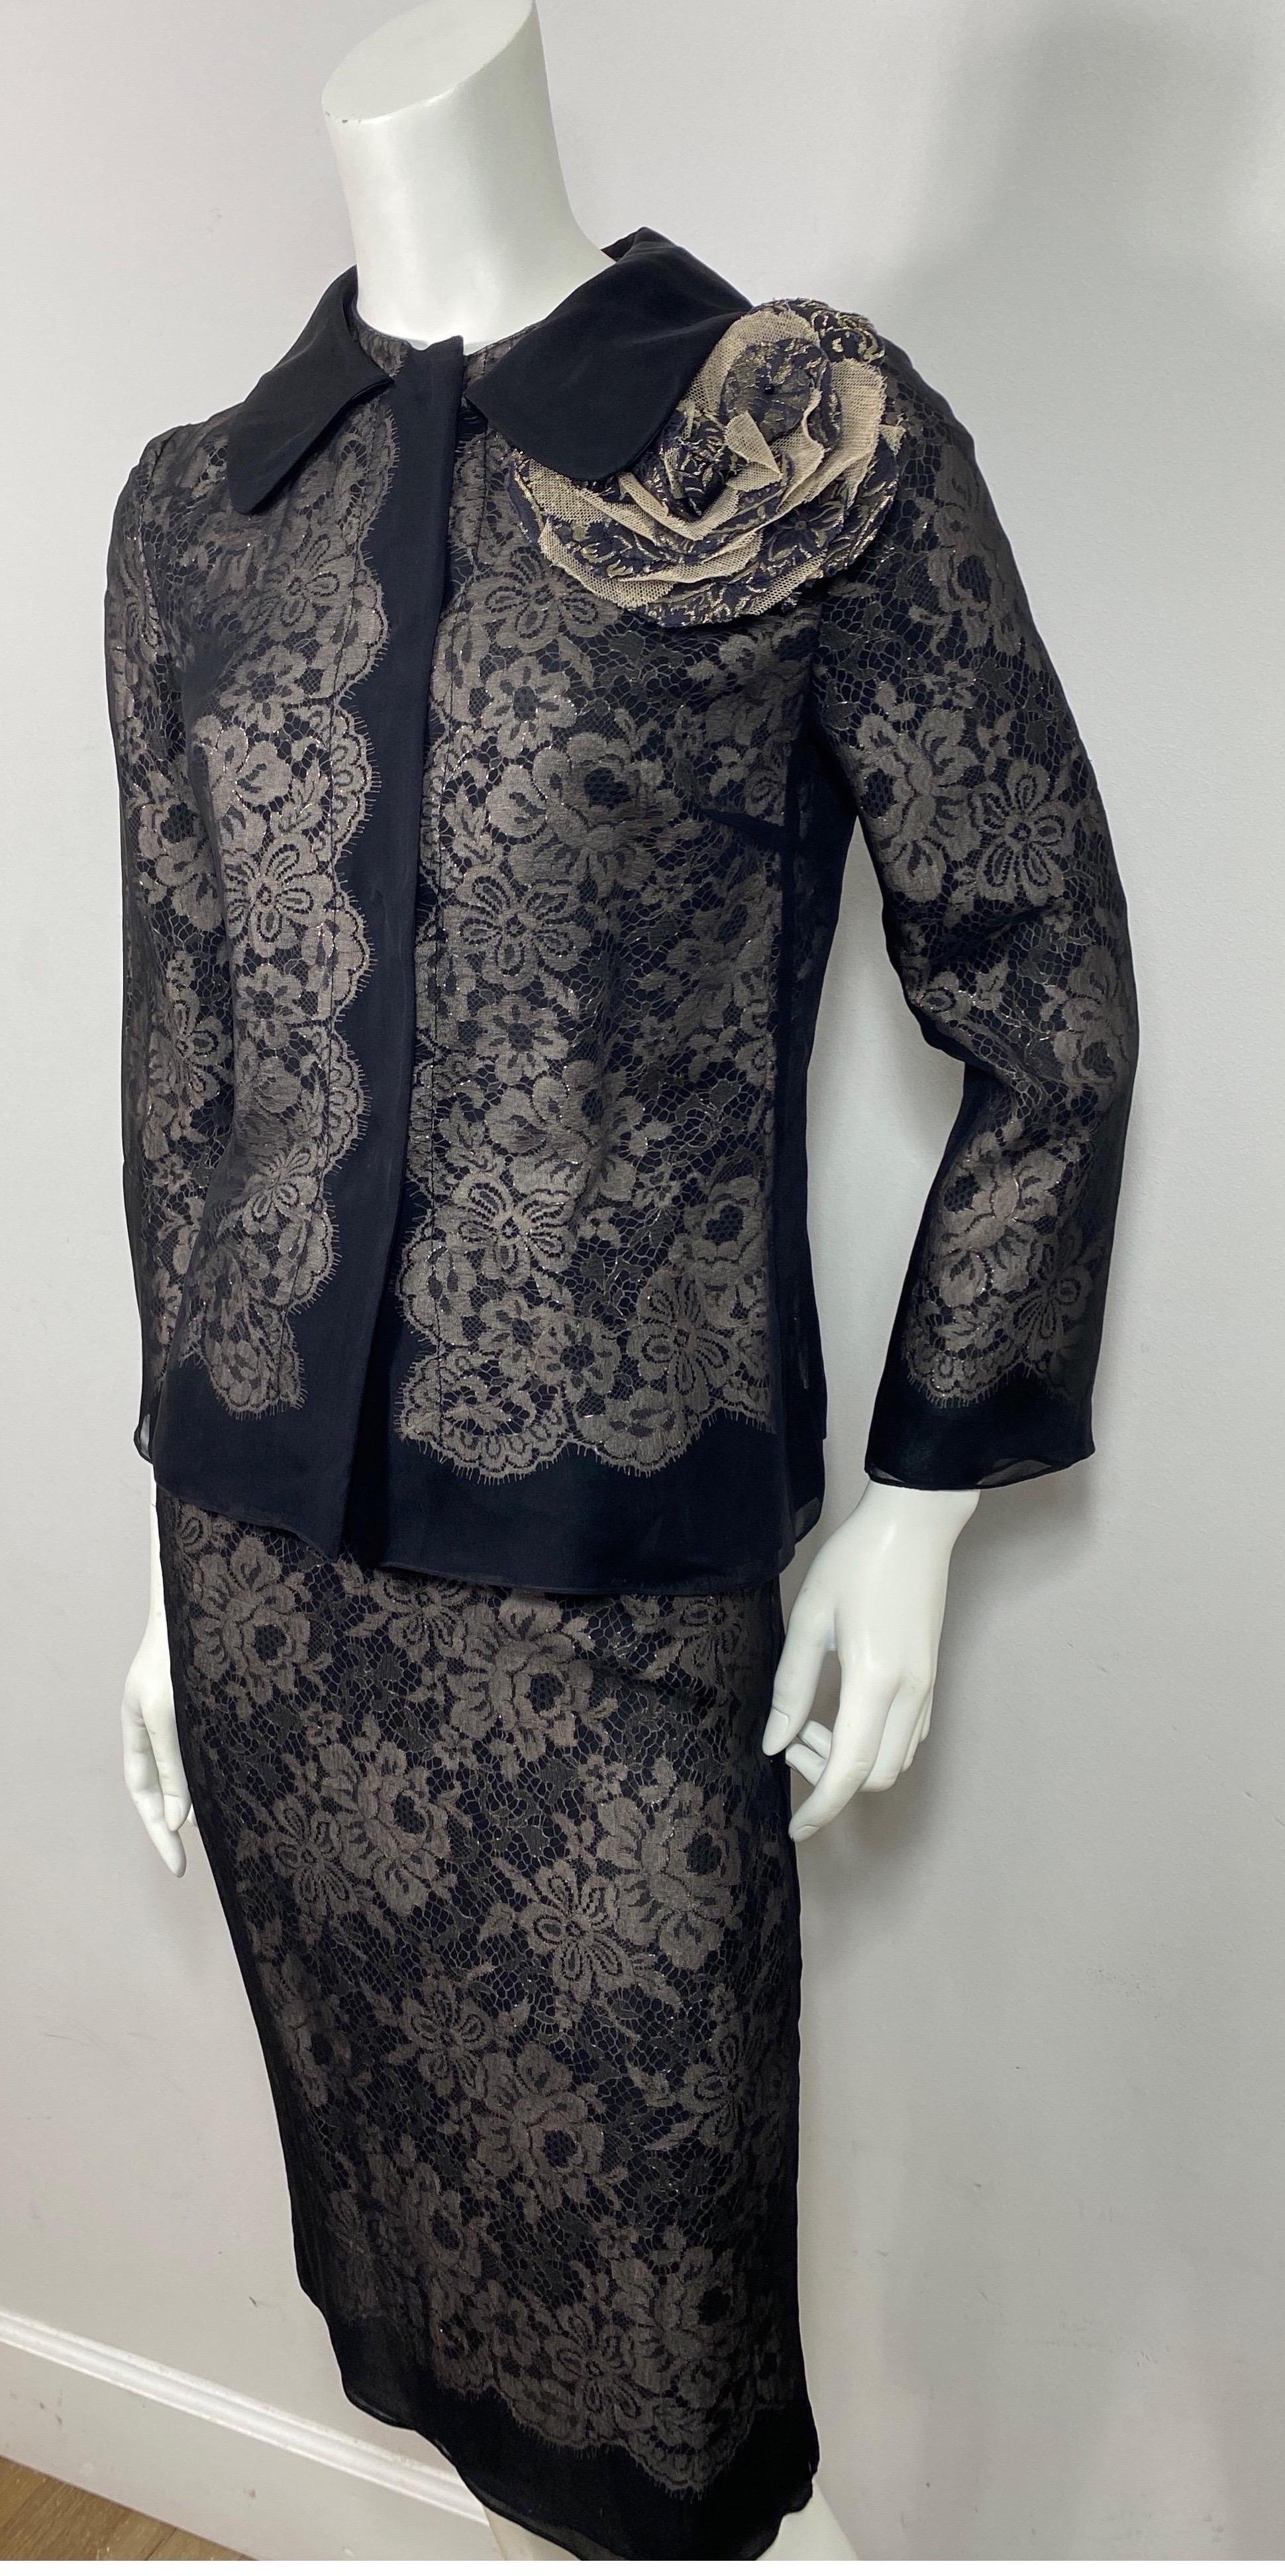 Dolce and Gabbana Black Silk and Gold Lace Skirt Suit - Size 40 In Excellent Condition For Sale In West Palm Beach, FL